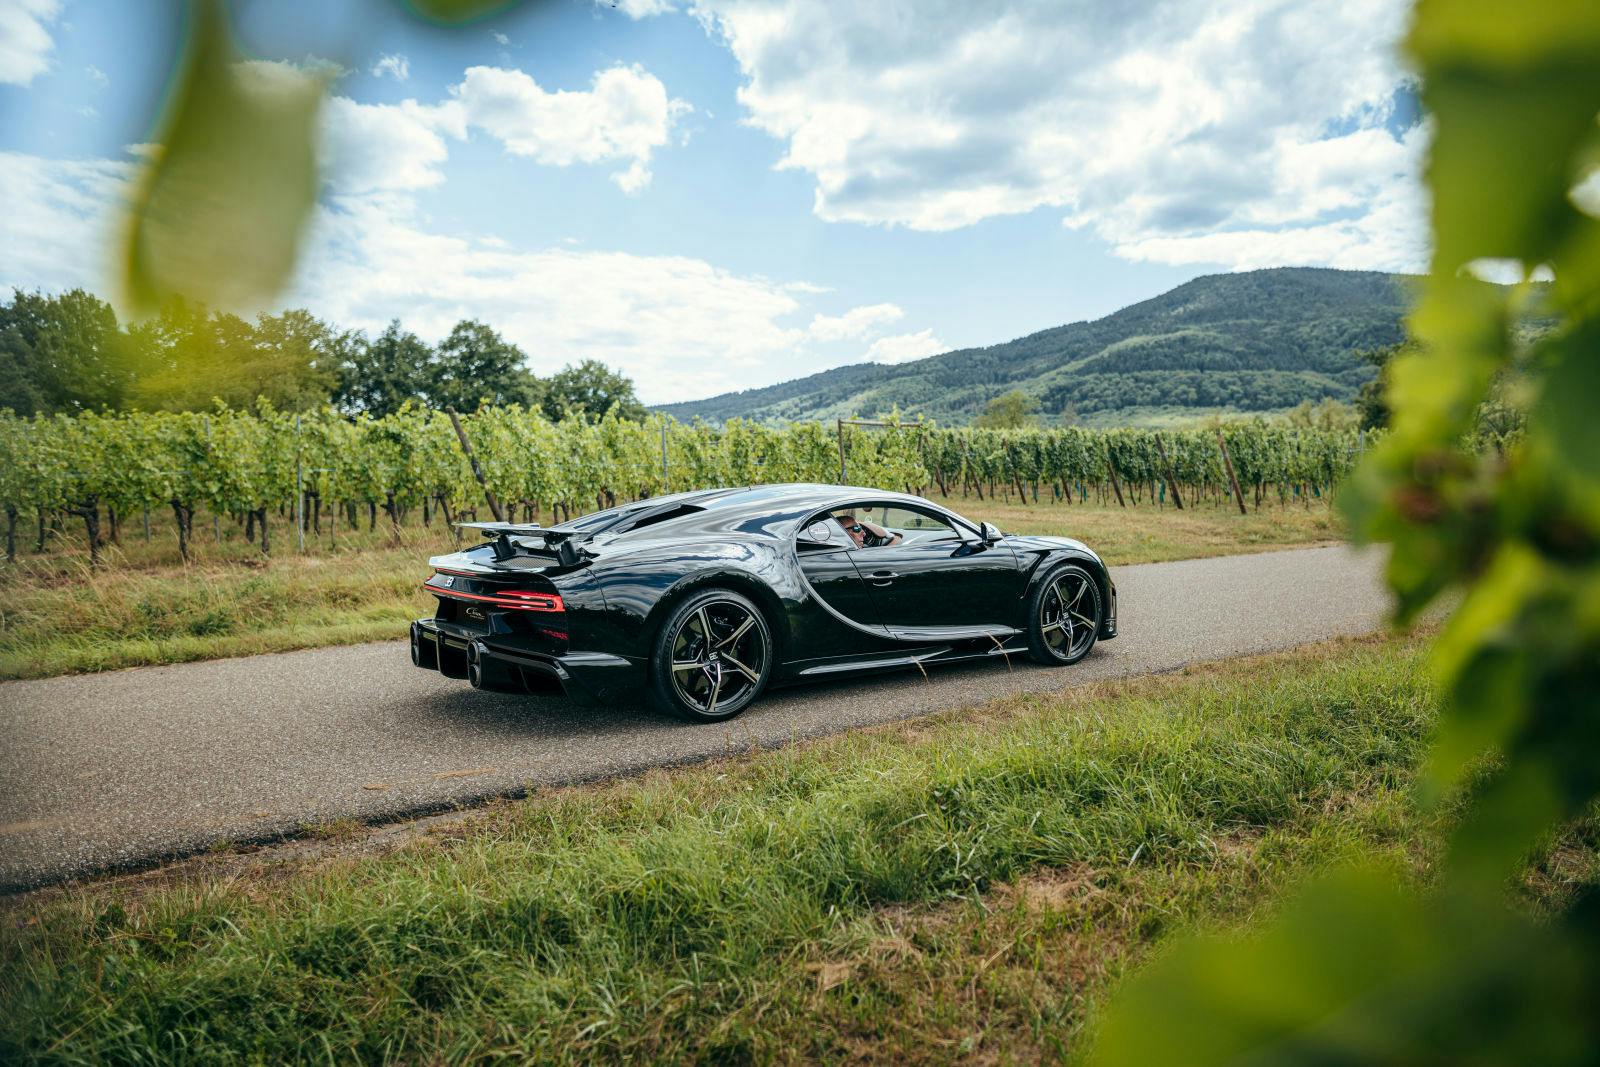 Guests could experience the extreme sensations offered by the hyper sports car Chiron Super Sport.